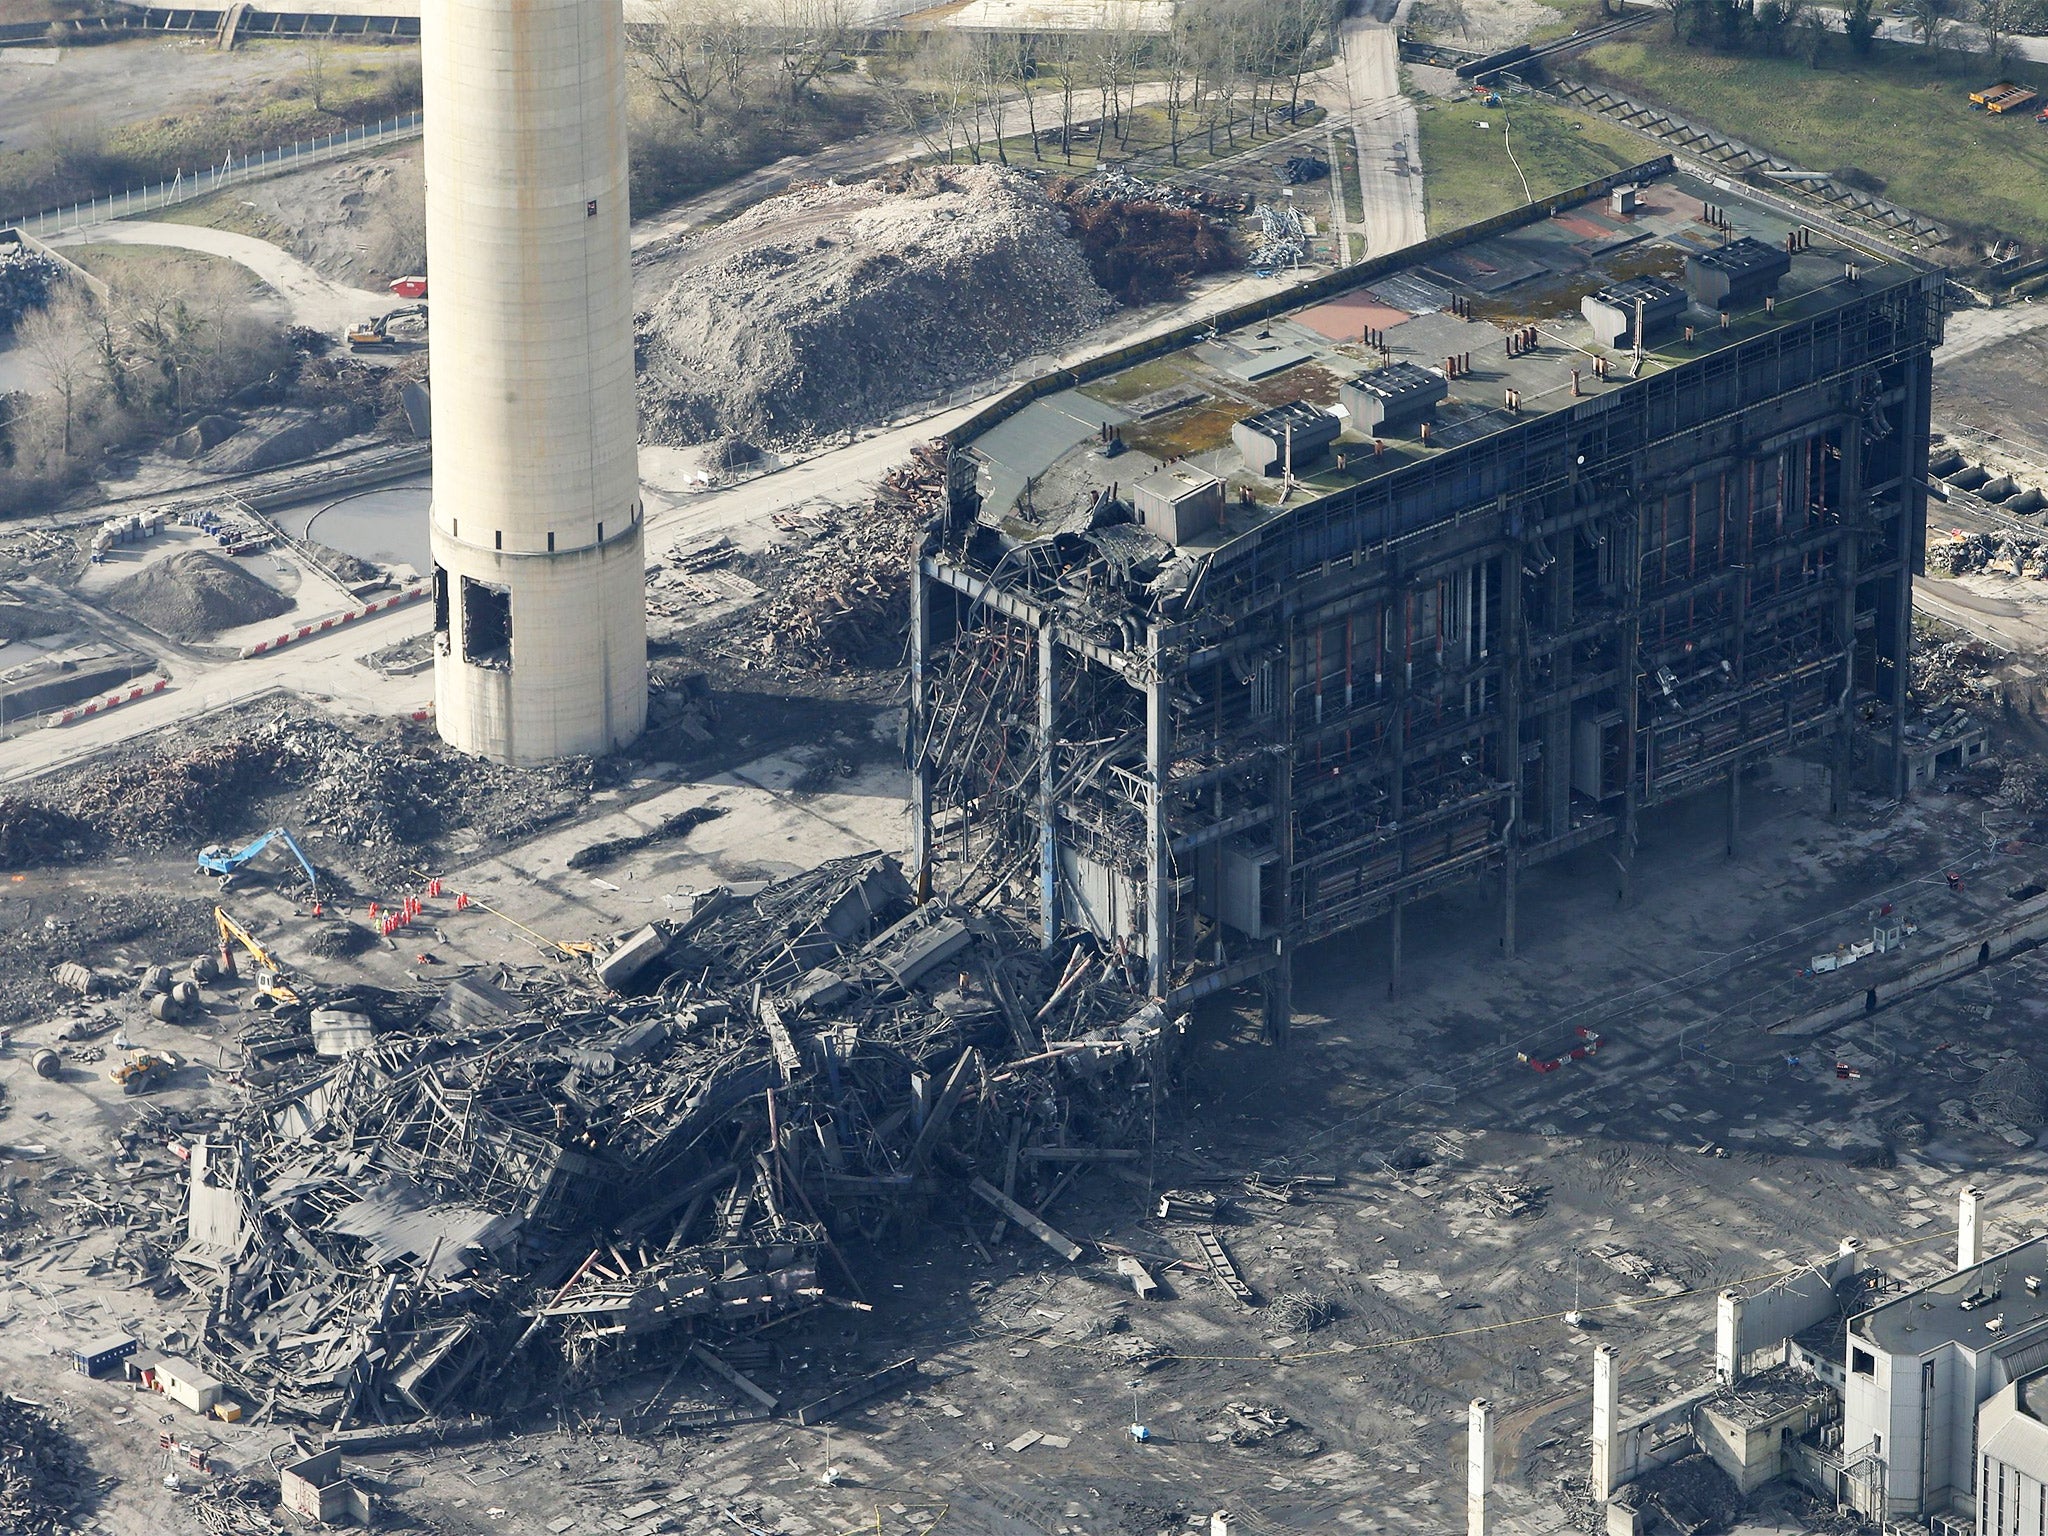 Four demolition workers were killed when Didcot A's boiler house collapsed unexpectedly in February